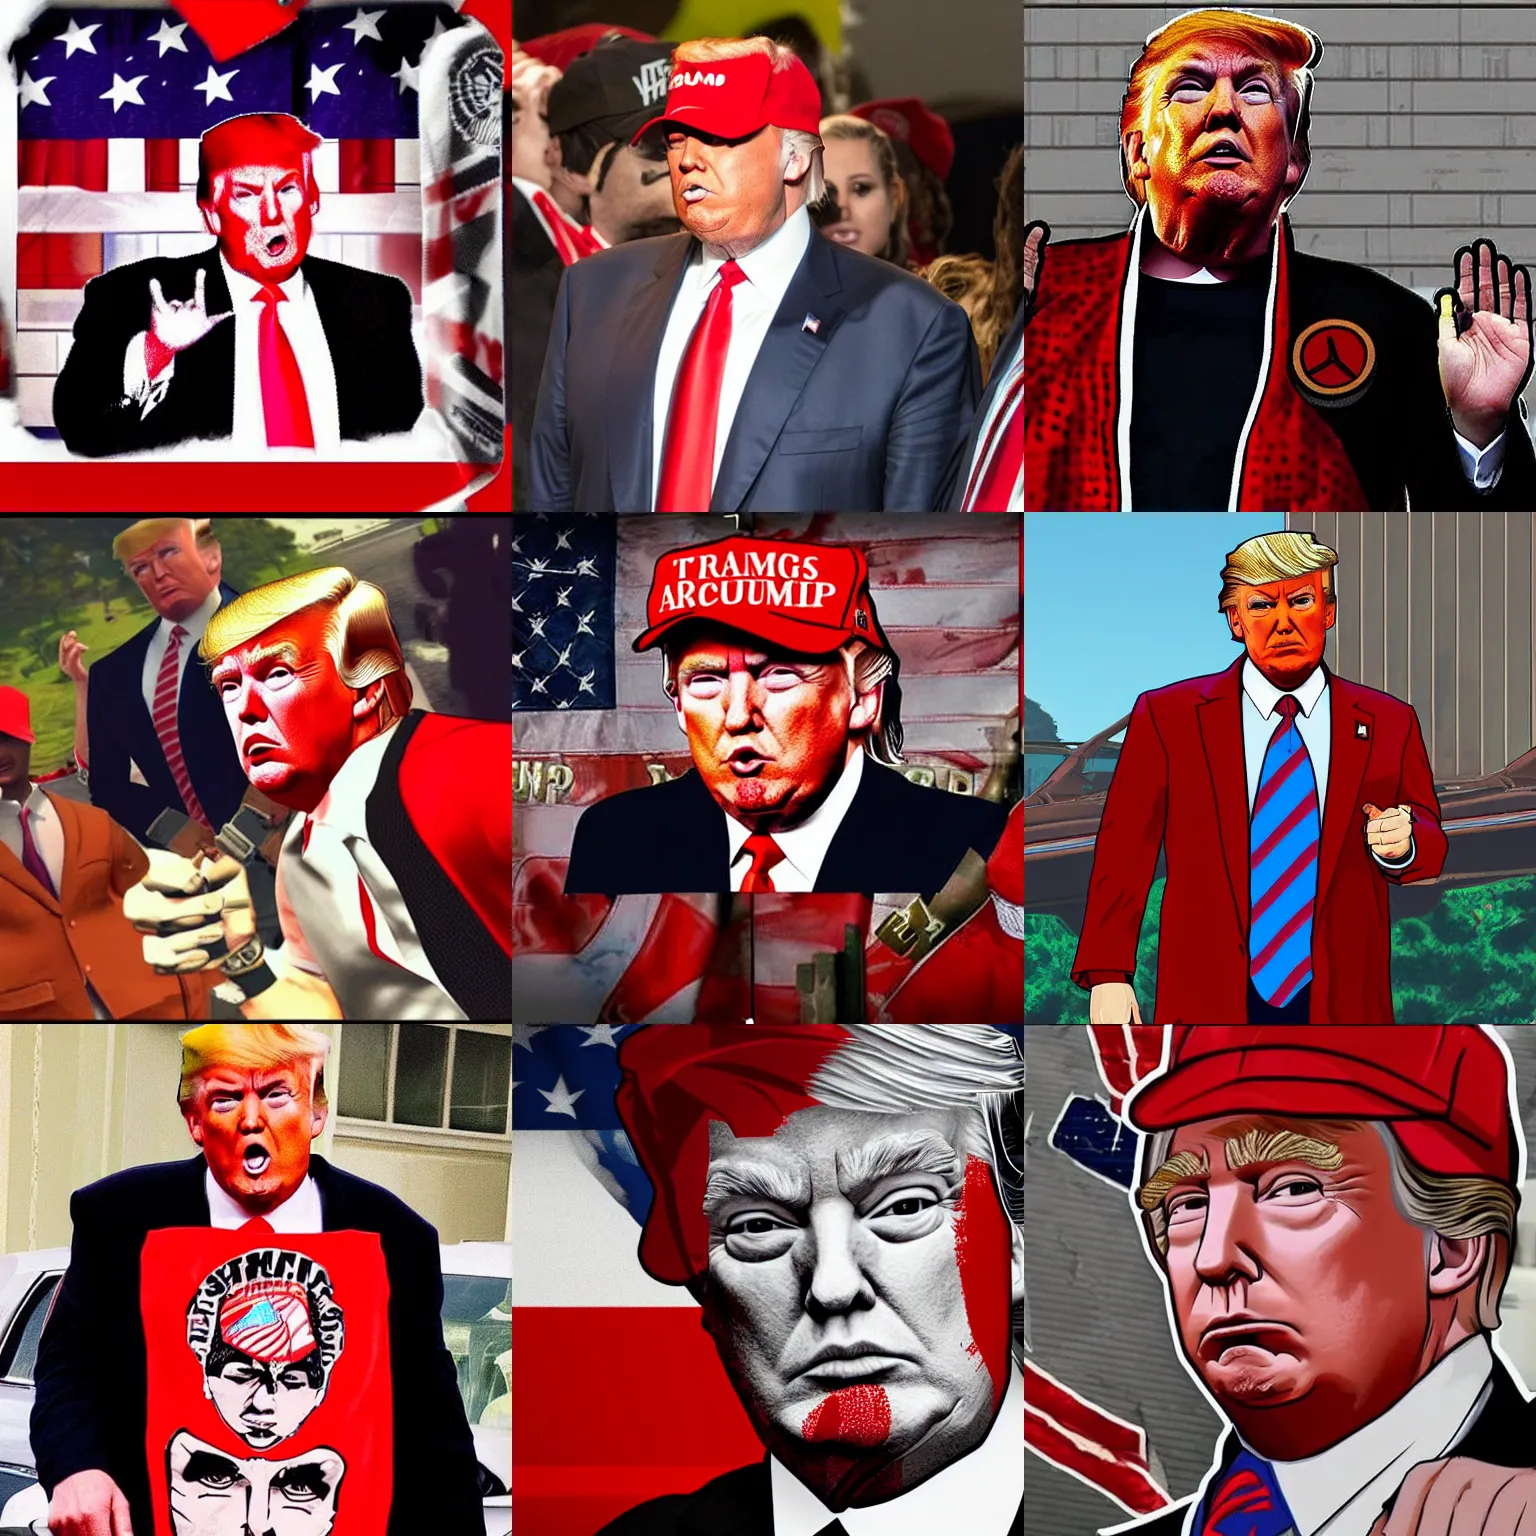 Prompt: donald trump with a red bandana. dressed as a gang member. gta loading screen.